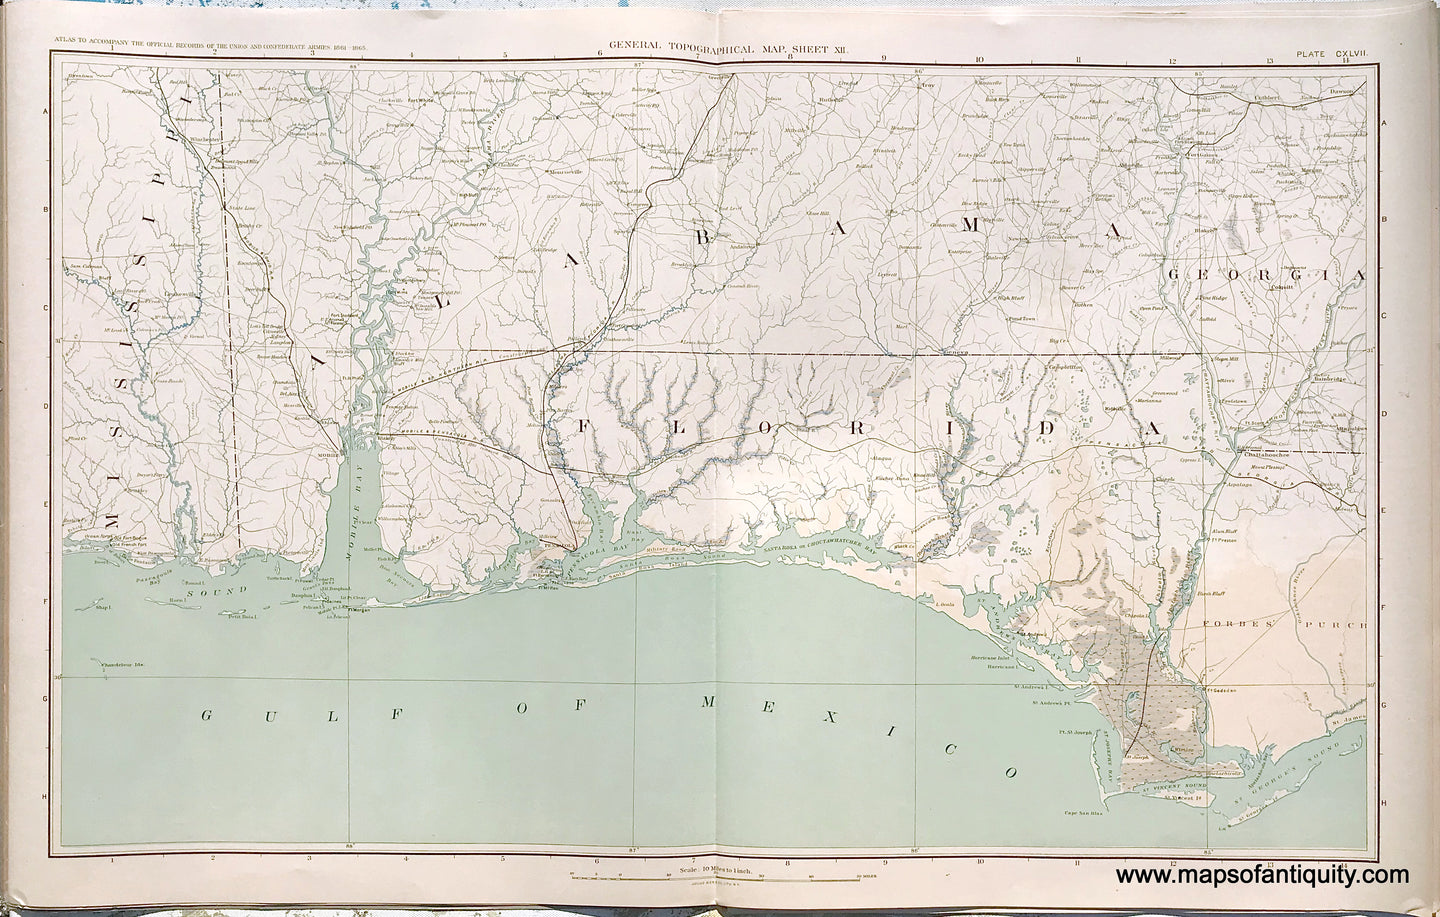 Antique-Lithograph-Print-Plate-147.-General-Topographical-Map.-Sheet-XII.-Gulf-of-Mexico--Sections-of-the-coasts-of-Mississippi-Alabama-and-Florida-with-a-small-portion-of-Georgia.-1894-US-War-Dept.-Civil-War-Civil-War-1800s-19th-century-Maps-of-Antiquity